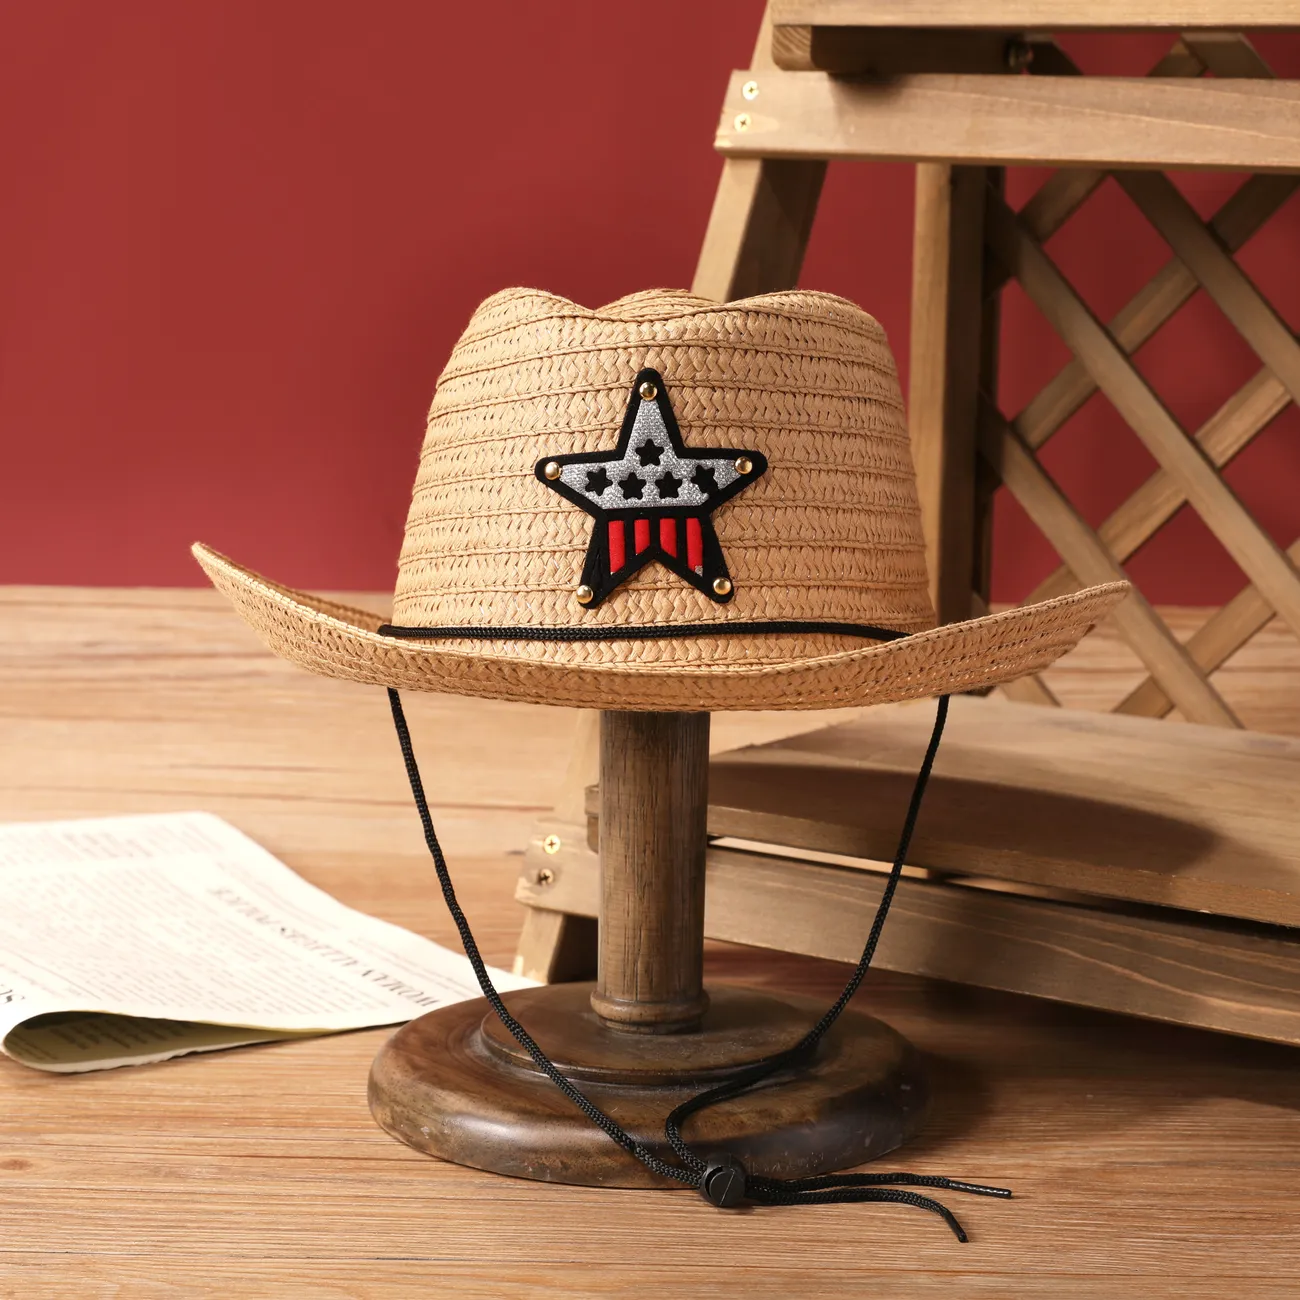 Western Cowboy Children's Sun Hat for Girls and Boys with Straw Weave, Five-Pointed Star Accent Khaki big image 1